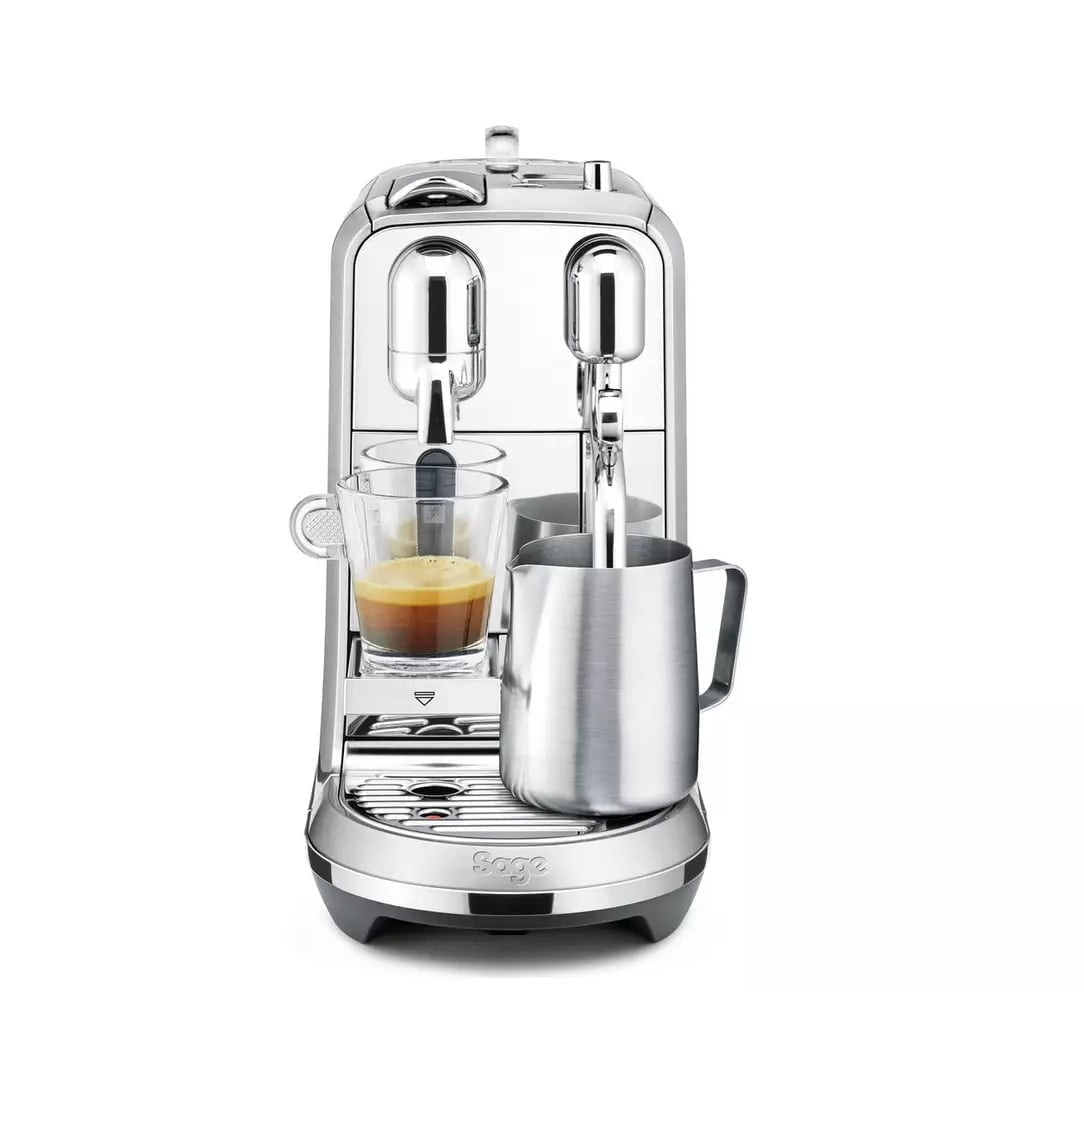 8835538 R Z001A Nespresso Https://Www.youtube.com/Watch?V=0Qmamxmrnhu The Nespresso Creatista Plus Gives You The Ability To Easily Create Personalized Café-Style Quality Coffee At Home. With A Stylish Sleek Design And Stainless Steel Finish, The Creatista Plus Has A 3 Second Heat Up Time, 8 Texture Levels And 11 Milk Temperature Settings. Each Machine Includes A Stainless Steel Milk Jug. Available Settings: 3 Coffee Volume Settings (From 25 To 150 Ml), 8 Milk Texture/Froth Settings (From 2 To 30 Mm) And 9 Milk Temperature Settings (From 55 To 75C). Comes With A 480Ml Stainless Steel Milk Jug, Pop Out Cup Support, Removable Drip Grid And Removable Drip Tray. &Amp;Lt;Ul&Amp;Gt; &Amp;Lt;Li&Amp;Gt;Coffee Options Include: Espresso, Cappuccino, Latte, Ristretto, Lungo, And Latte Macchiato.&Amp;Lt;/Li&Amp;Gt; &Amp;Lt;Li&Amp;Gt;Compatible With Nespresso Original Capsules.&Amp;Lt;/Li&Amp;Gt; &Amp;Lt;Li&Amp;Gt;Recyclable Pods.&Amp;Lt;/Li&Amp;Gt; &Amp;Lt;Li&Amp;Gt;Strength Selector - To Tailor The Strength Of The Coffee To Your Taste.&Amp;Lt;/Li&Amp;Gt; &Amp;Lt;Li&Amp;Gt;Milk Frother Included.&Amp;Lt;/Li&Amp;Gt; &Amp;Lt;Li&Amp;Gt;Incorporated Crema Device.&Amp;Lt;/Li&Amp;Gt; &Amp;Lt;Li&Amp;Gt;19 Bar Pump Pressure.&Amp;Lt;/Li&Amp;Gt; &Amp;Lt;Li&Amp;Gt;Water Capacity 1.5 Litres.&Amp;Lt;/Li&Amp;Gt; &Amp;Lt;Li&Amp;Gt;Water Level Gauge.&Amp;Lt;/Li&Amp;Gt; &Amp;Lt;Li&Amp;Gt;Transparent Removable Water Tank.&Amp;Lt;/Li&Amp;Gt; &Amp;Lt;Li&Amp;Gt;Adjustable Cup Stand For Any Size Mug.&Amp;Lt;/Li&Amp;Gt; &Amp;Lt;Li&Amp;Gt;Removable Drip Tray.&Amp;Lt;/Li&Amp;Gt; &Amp;Lt;Li&Amp;Gt;Magnetic Pod Holder.&Amp;Lt;/Li&Amp;Gt; &Amp;Lt;Li&Amp;Gt;Auto Shut-Off After 20 Minutes.&Amp;Lt;/Li&Amp;Gt; &Amp;Lt;Li&Amp;Gt;Descale Warning Feature.&Amp;Lt;/Li&Amp;Gt; &Amp;Lt;Li&Amp;Gt;Dishwasher Safe Parts For Effortless Cleaning.&Amp;Lt;/Li&Amp;Gt; &Amp;Lt;/Ul&Amp;Gt; With 14 Capsules &Amp;Lt;H4&Amp;Gt;Warranty : 1 Year (Shipping Not Included)&Amp;Lt;/H4&Amp;Gt; Nespresso Nespresso Creatista Plus Pod Coffee Machine By Sage - Steel (With 14 Capsules)